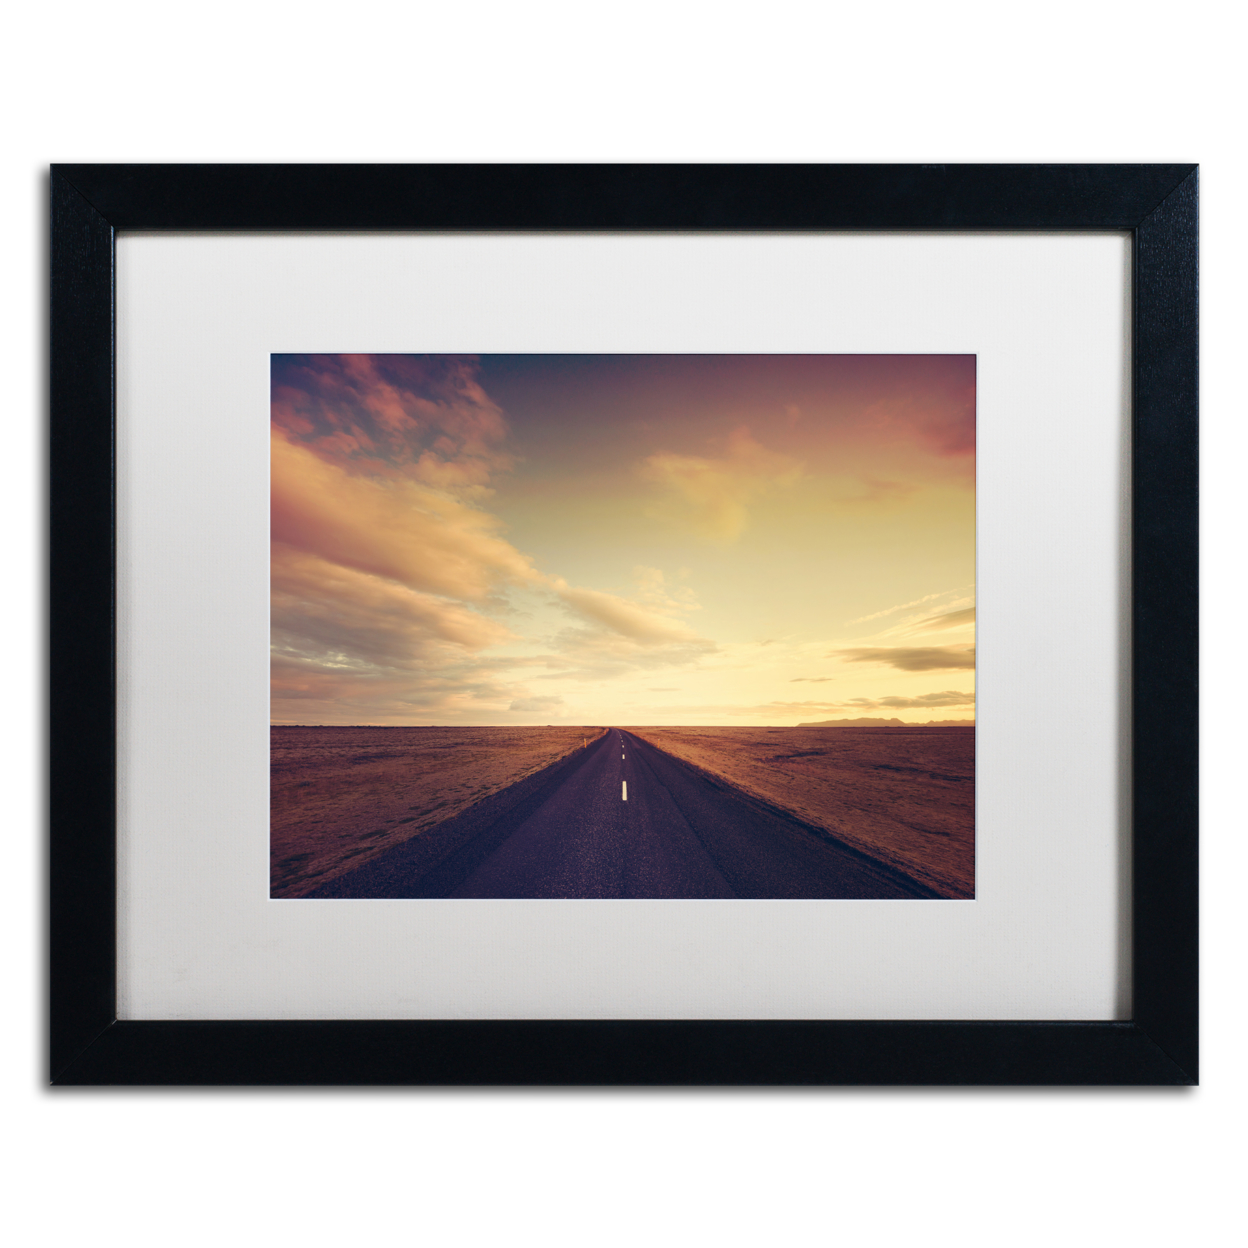 Philippe Sainte-Laudy 'Sunset Road' Black Wooden Framed Art 18 X 22 Inches